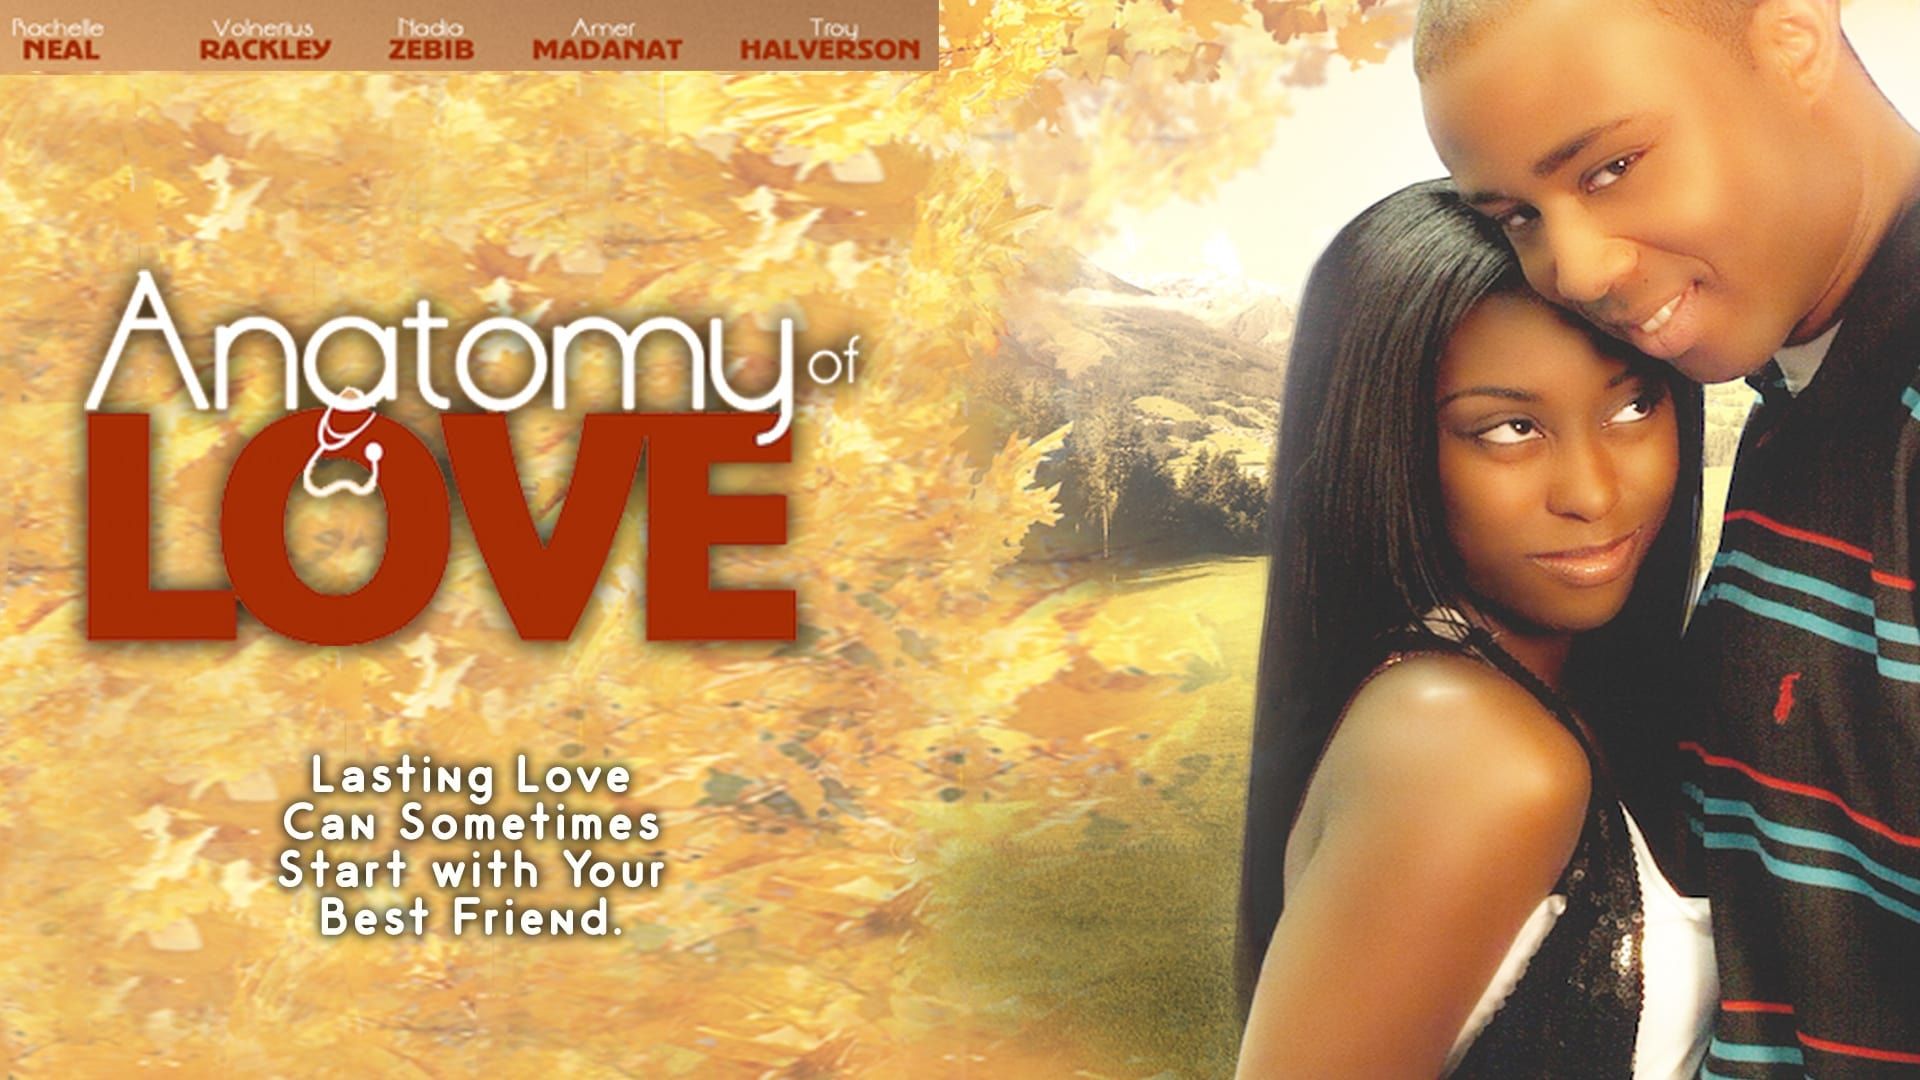 The Anatomy of Love background